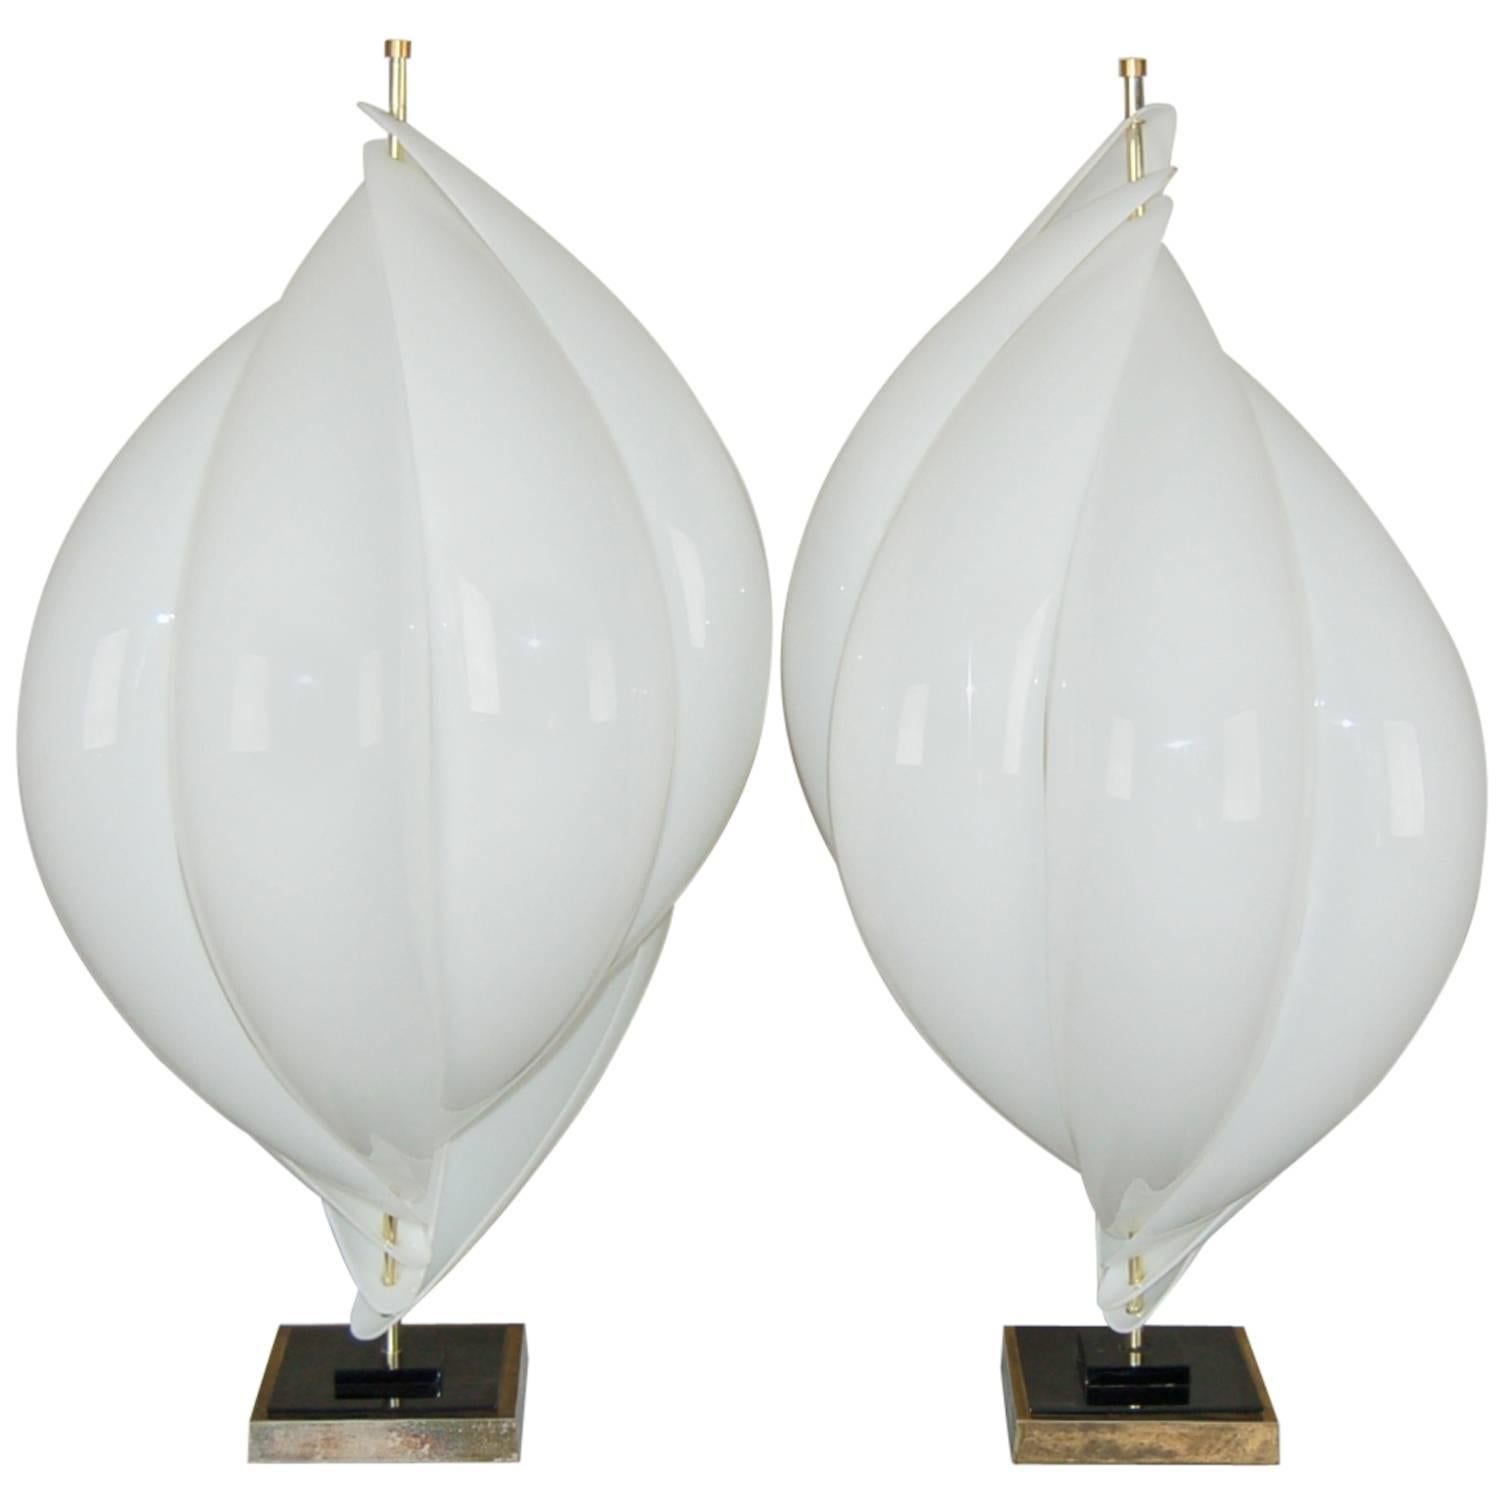 Matched Pair of Acrylic Petal Table Lamps by Rougier, 1970's For Sale